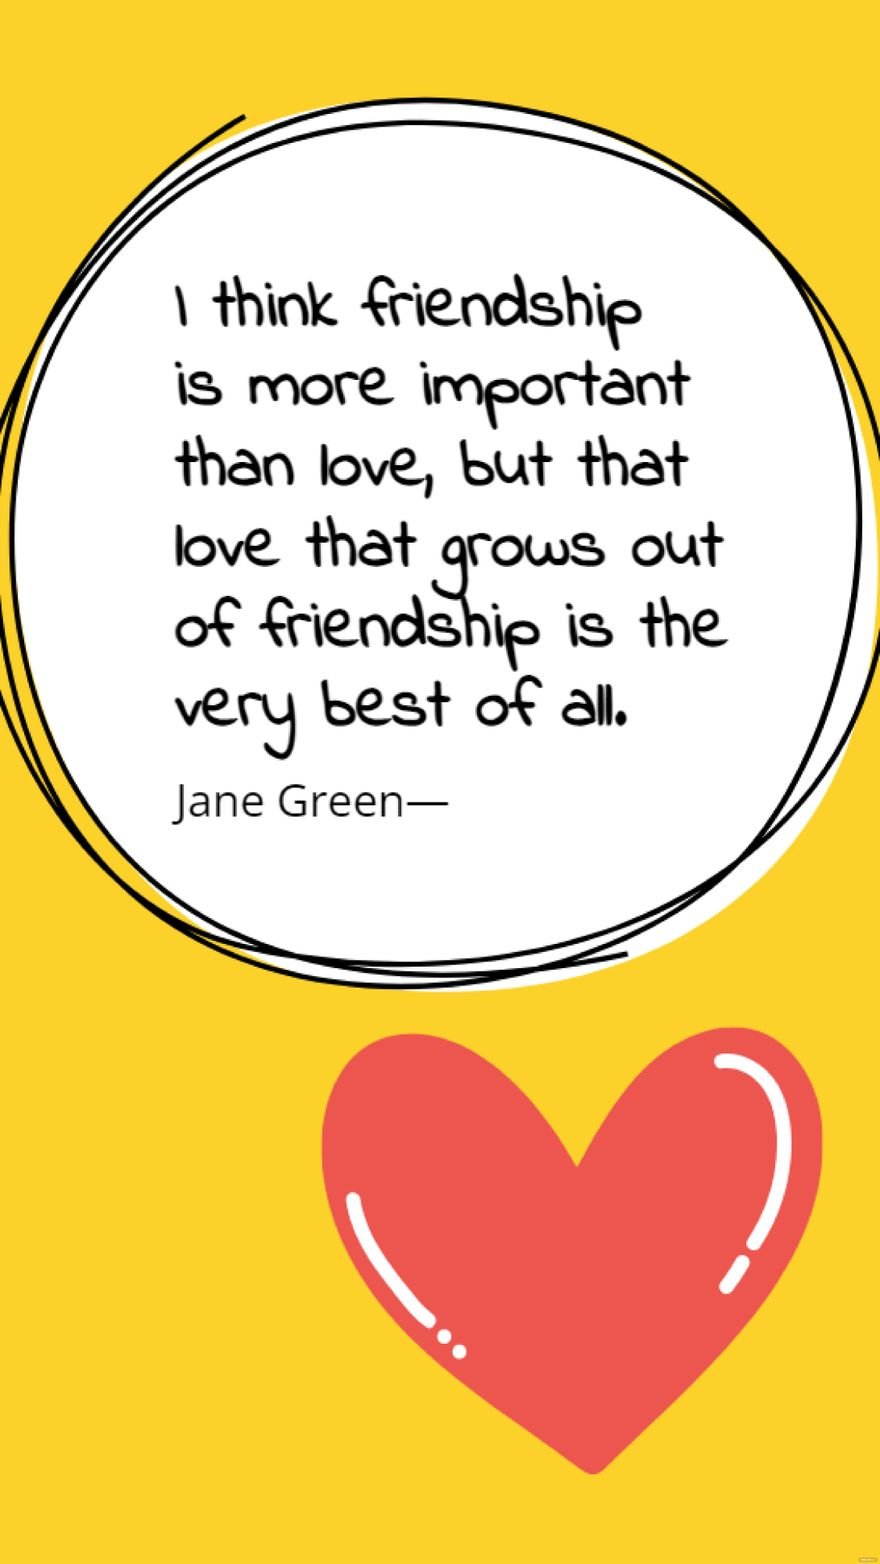 Jane Green  I think friendship is more important than love but that love that grows out of friendship is the very best of all